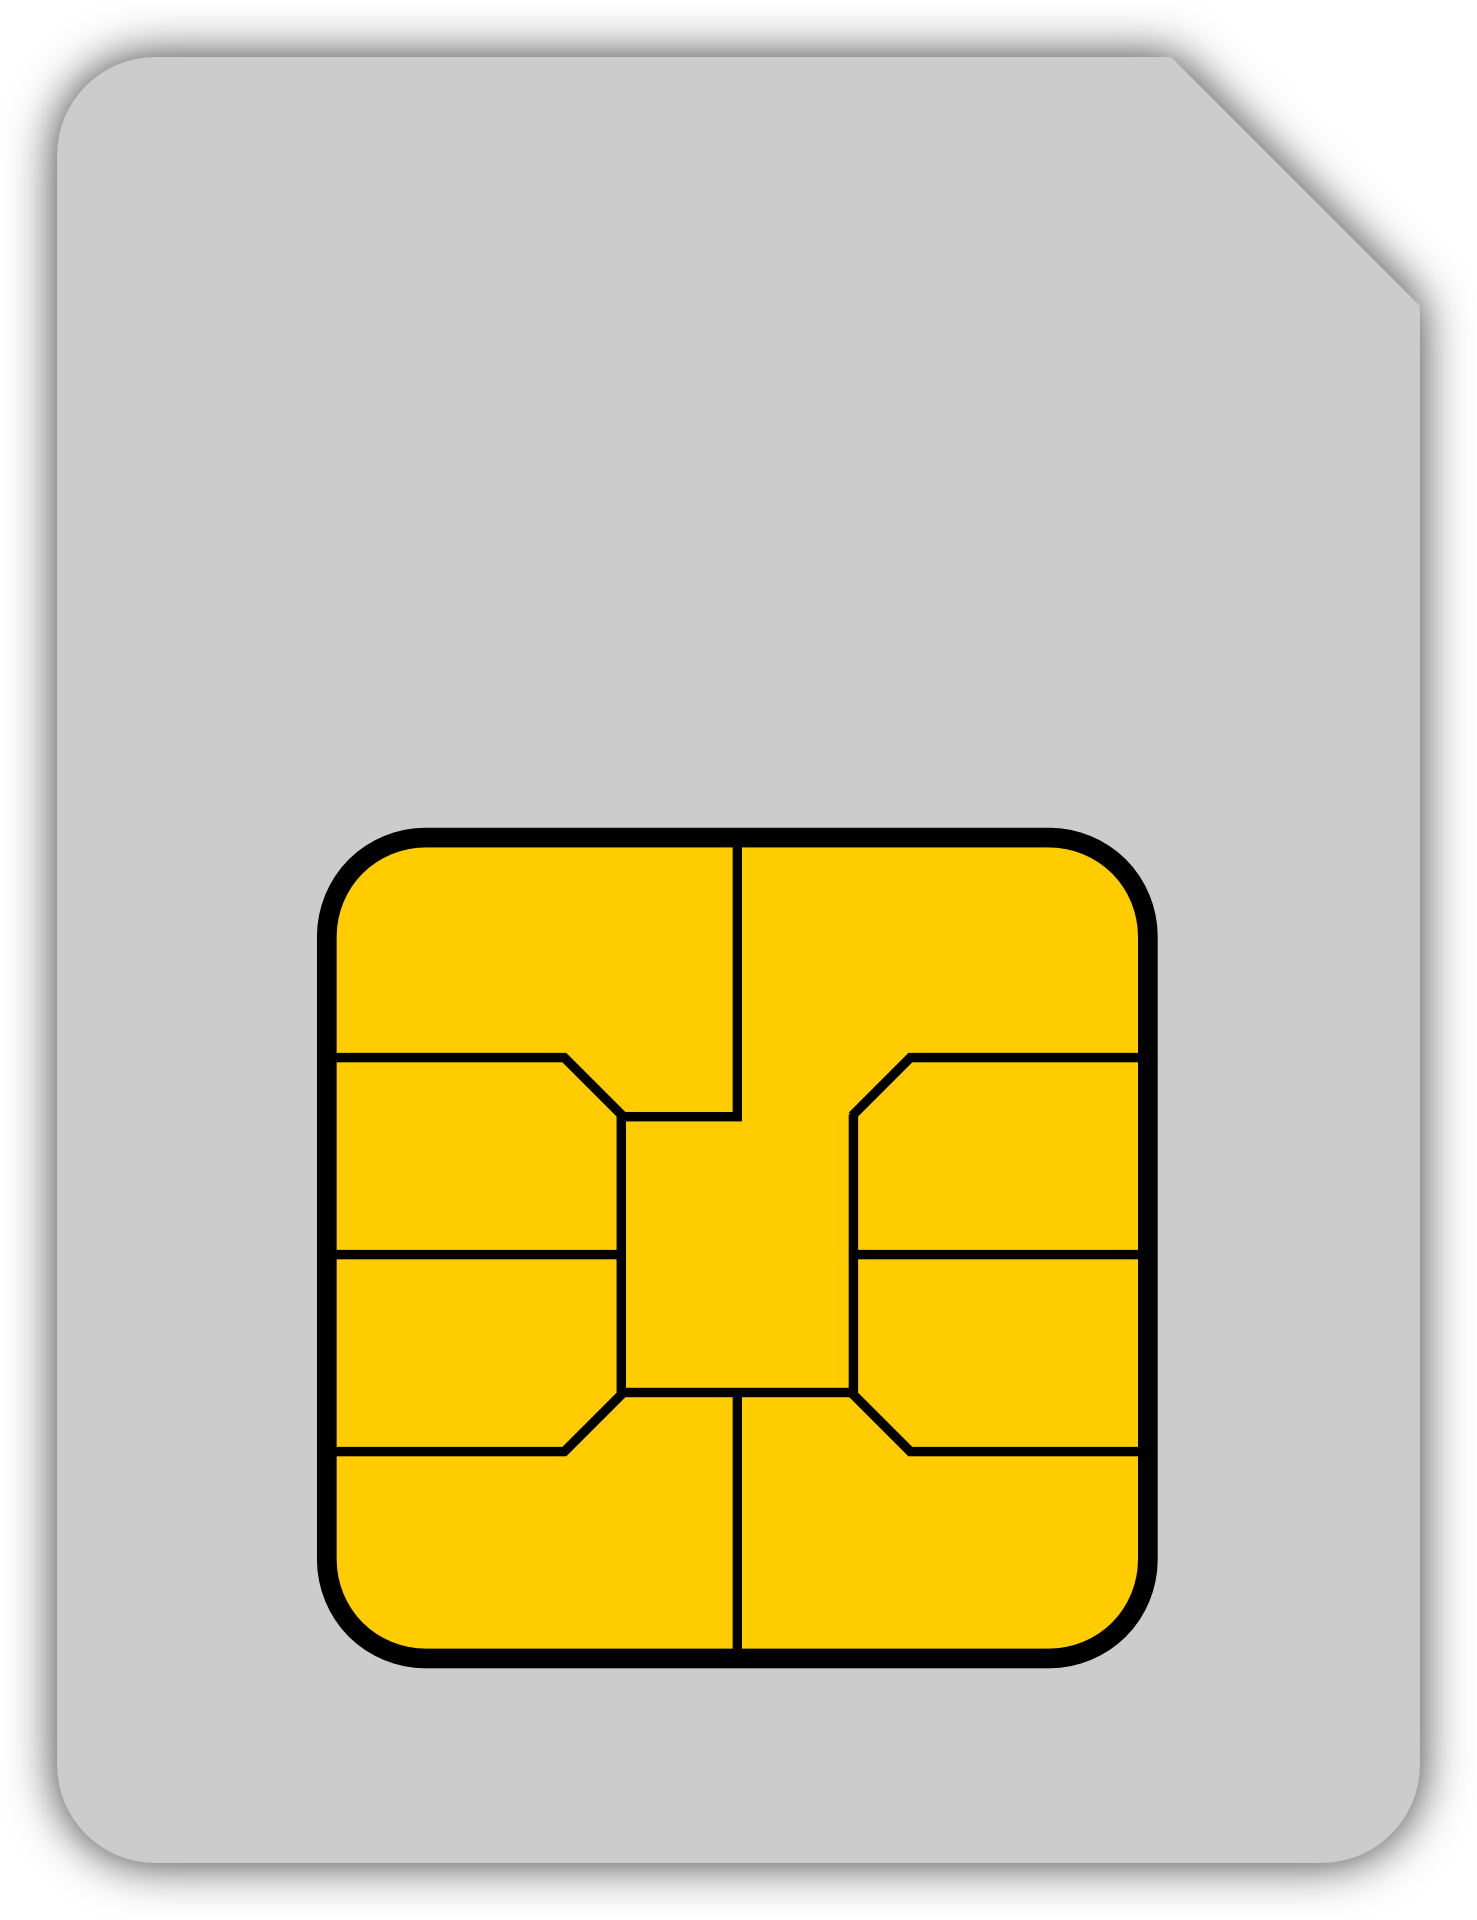 Drawing of a sim circuit communication card free image download